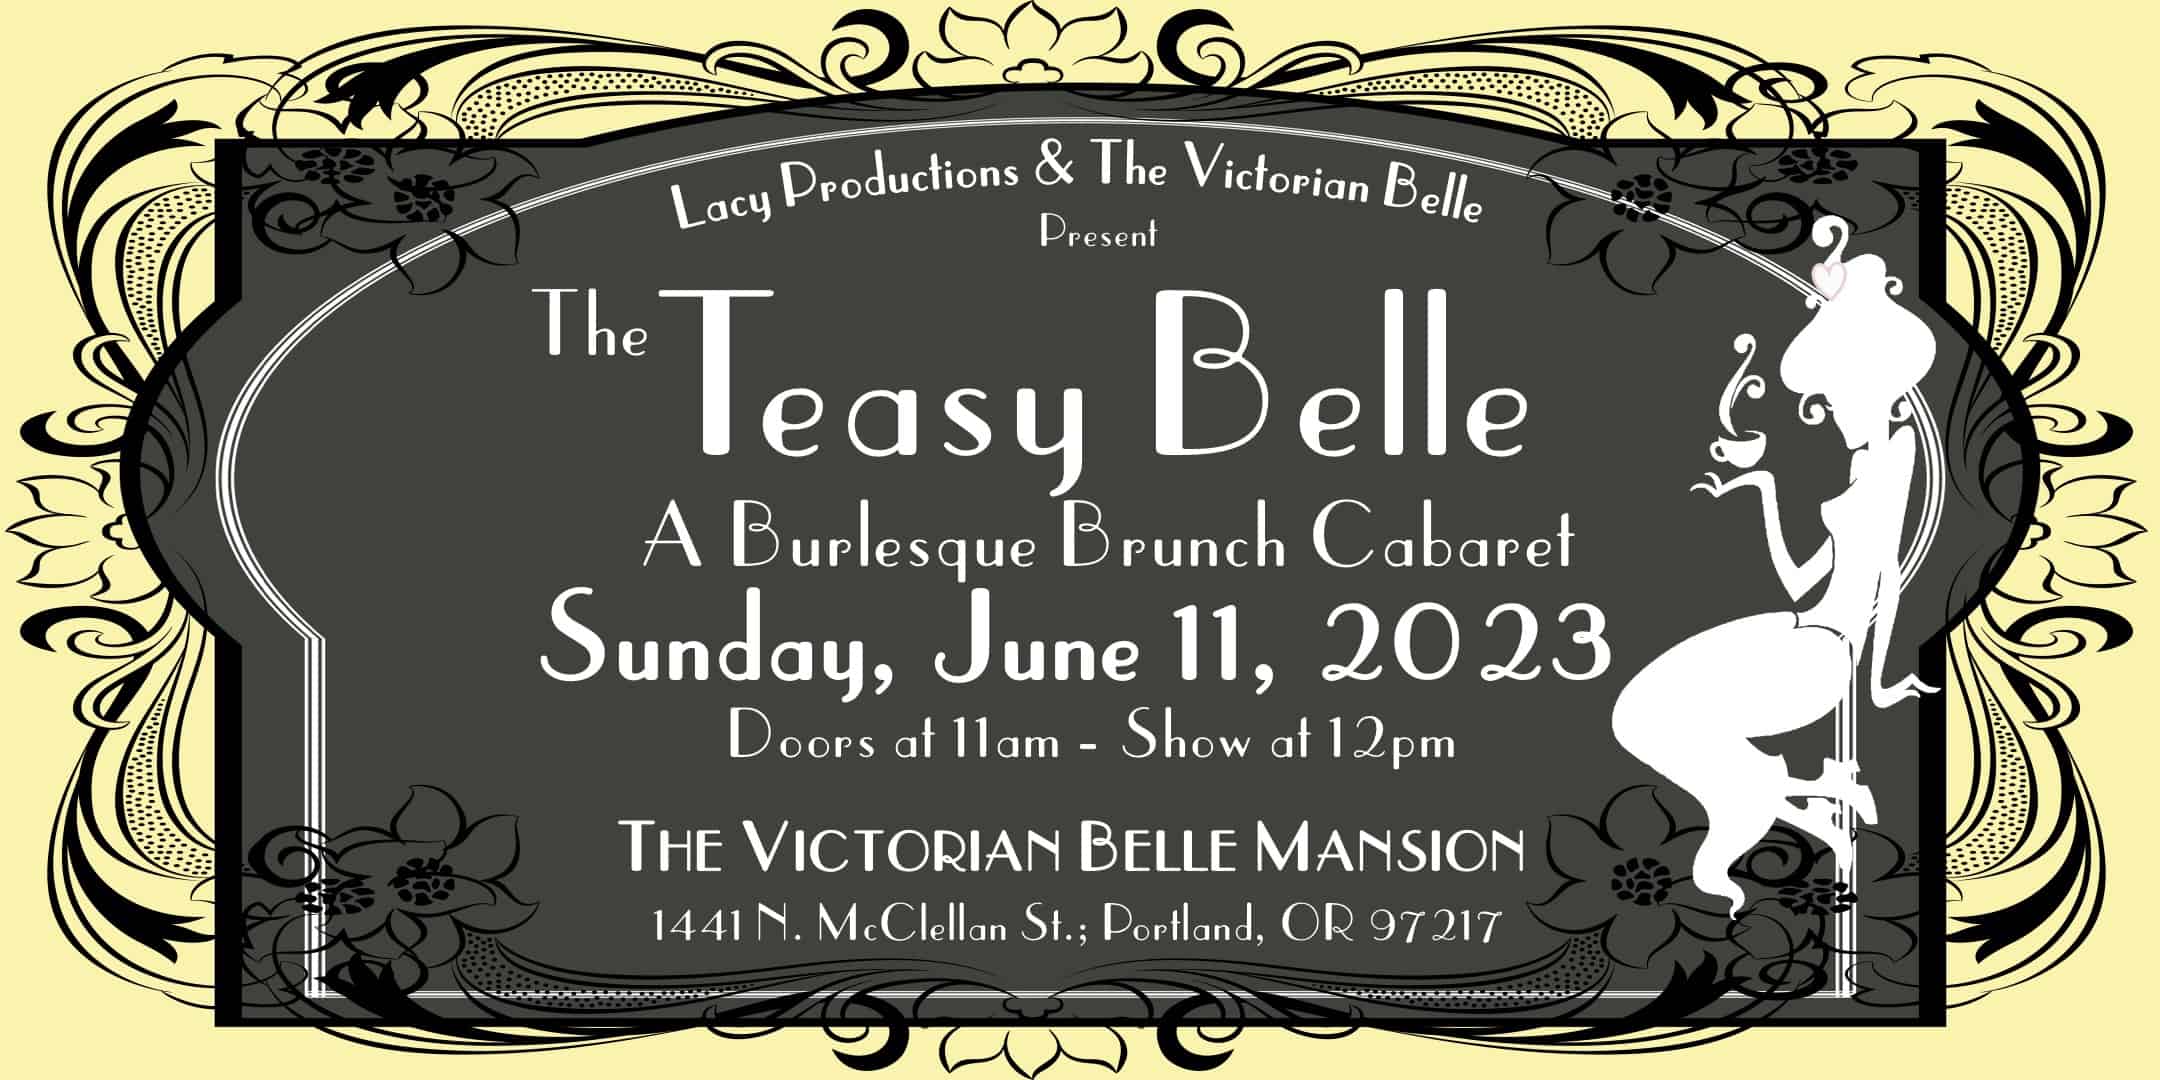 The Teasy Belle: A Burlesque Brunch Cabaret. Sunday, June 11th, 2023. Doors at 11:00 AM. Show at 12:00 PM.